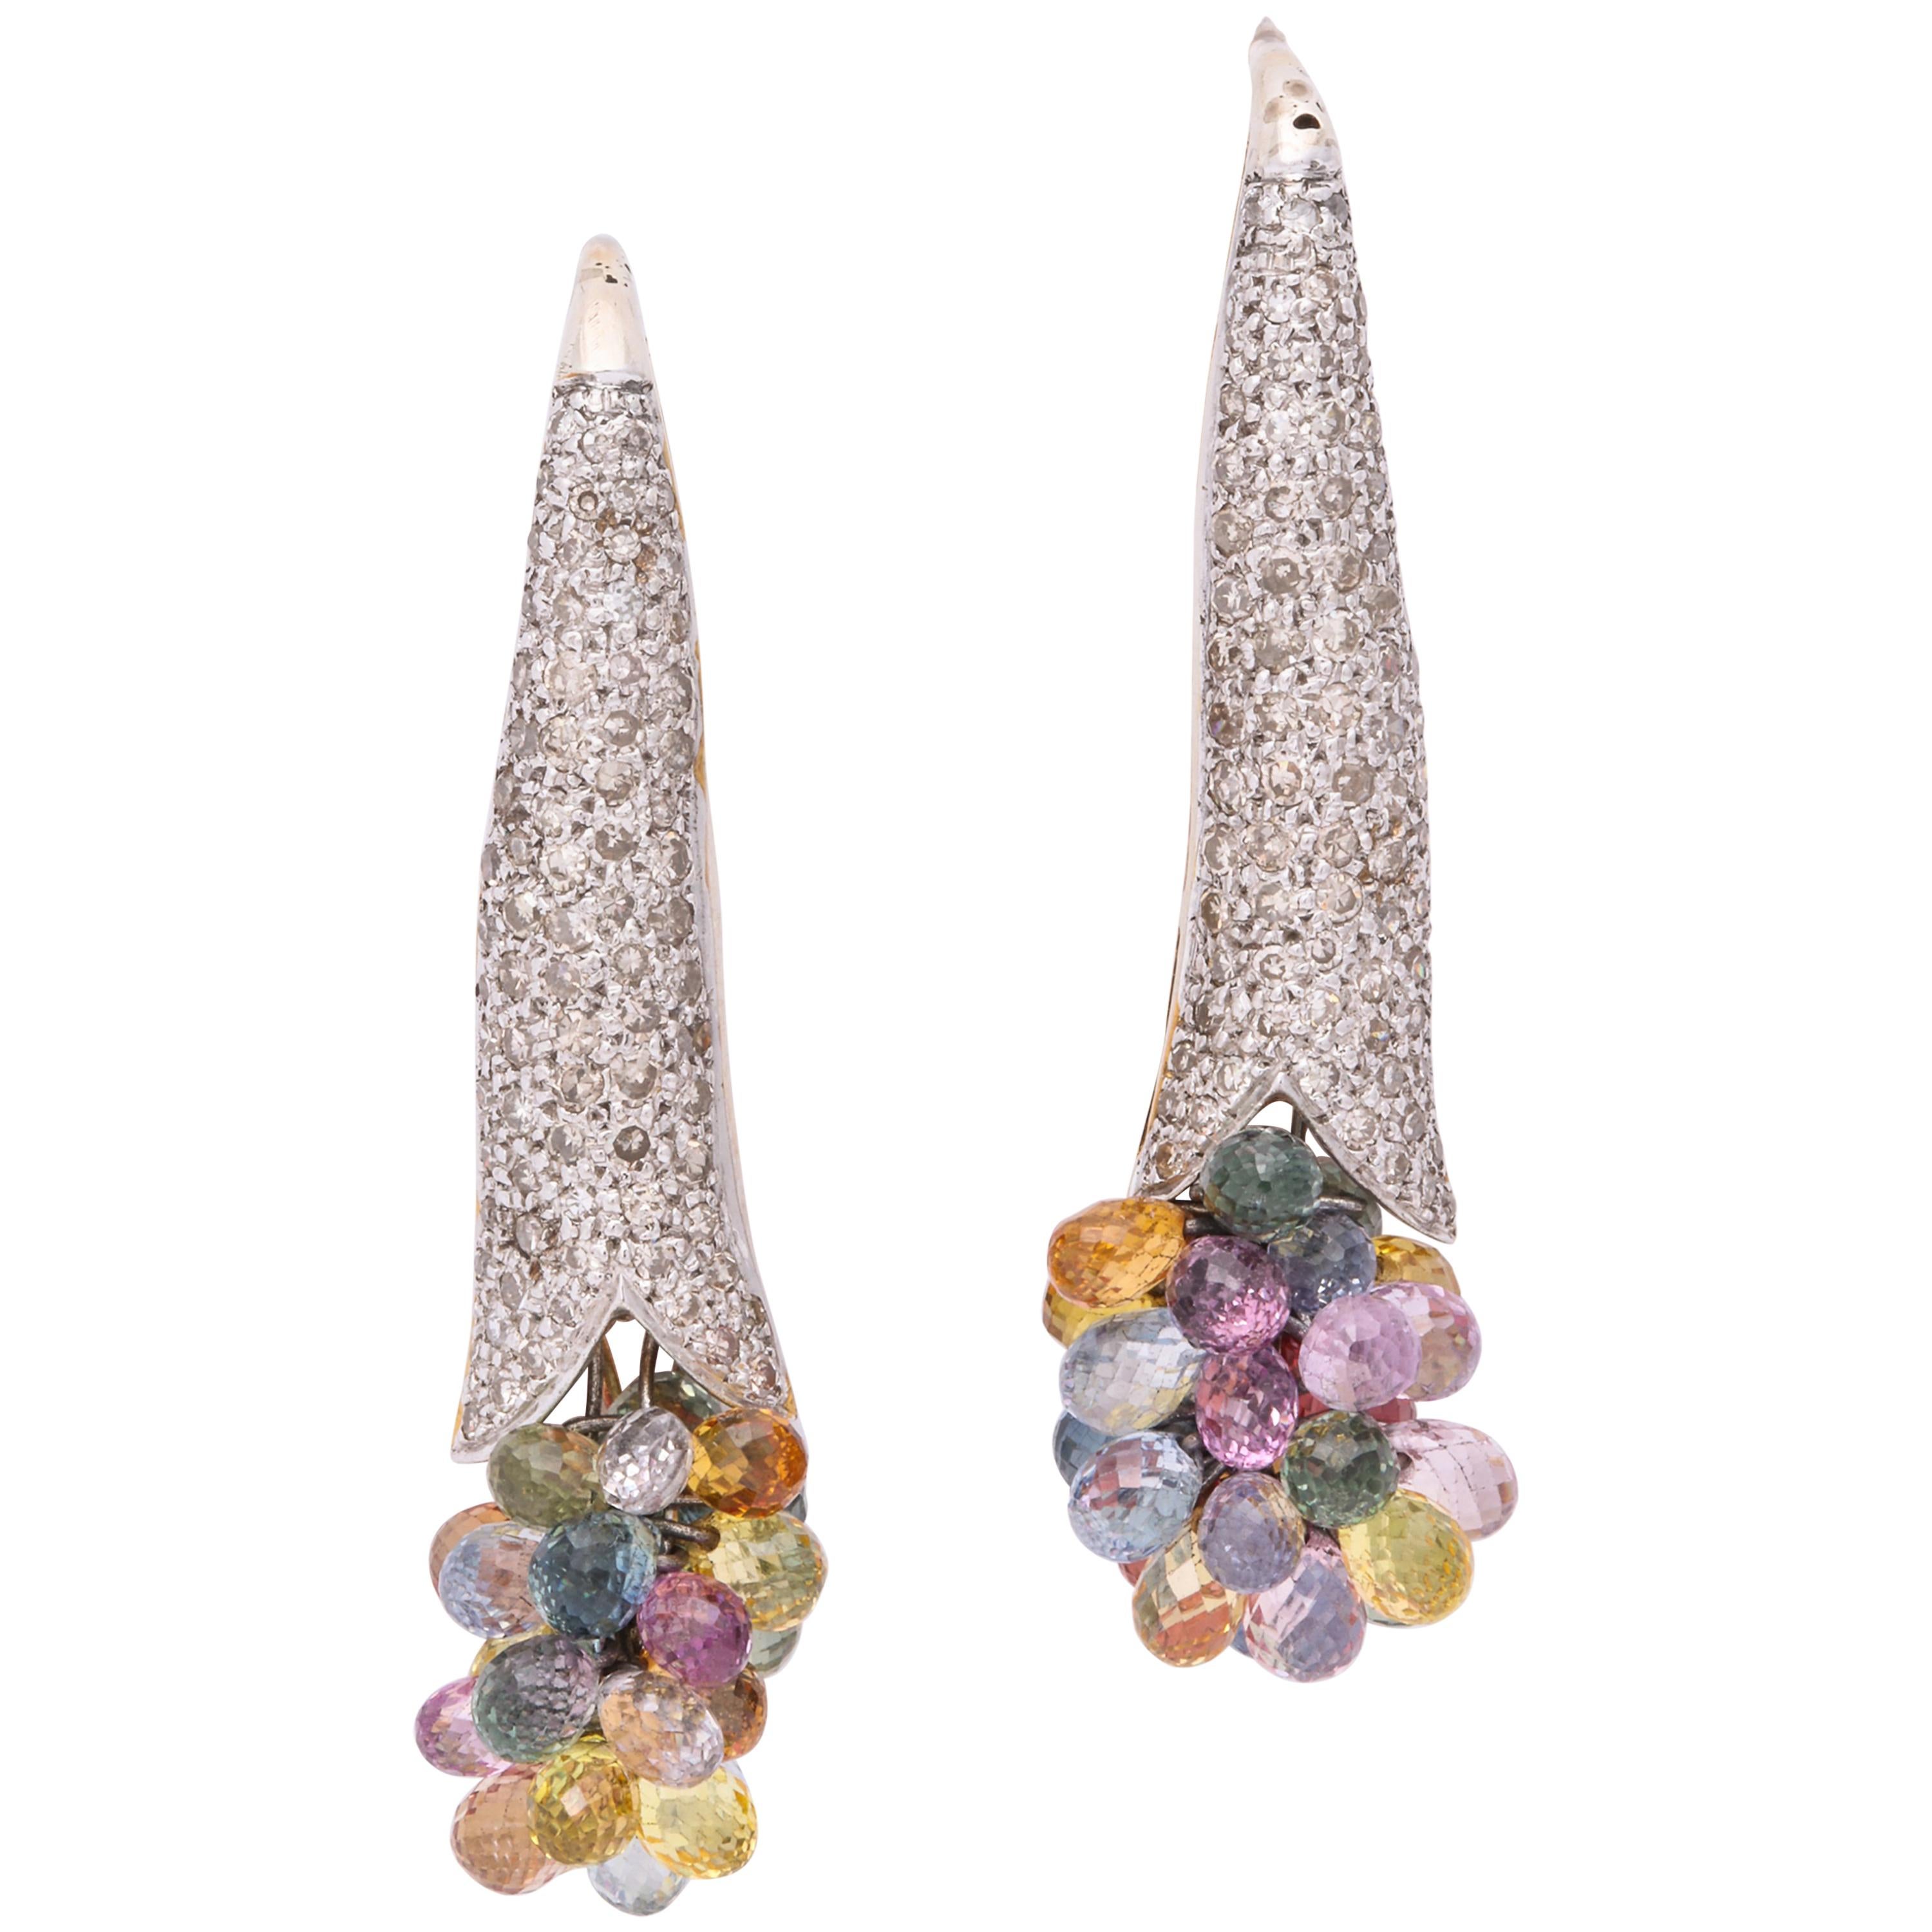 Diamond Earrings with a  Dangling Bouquet of Colored  Gemstones